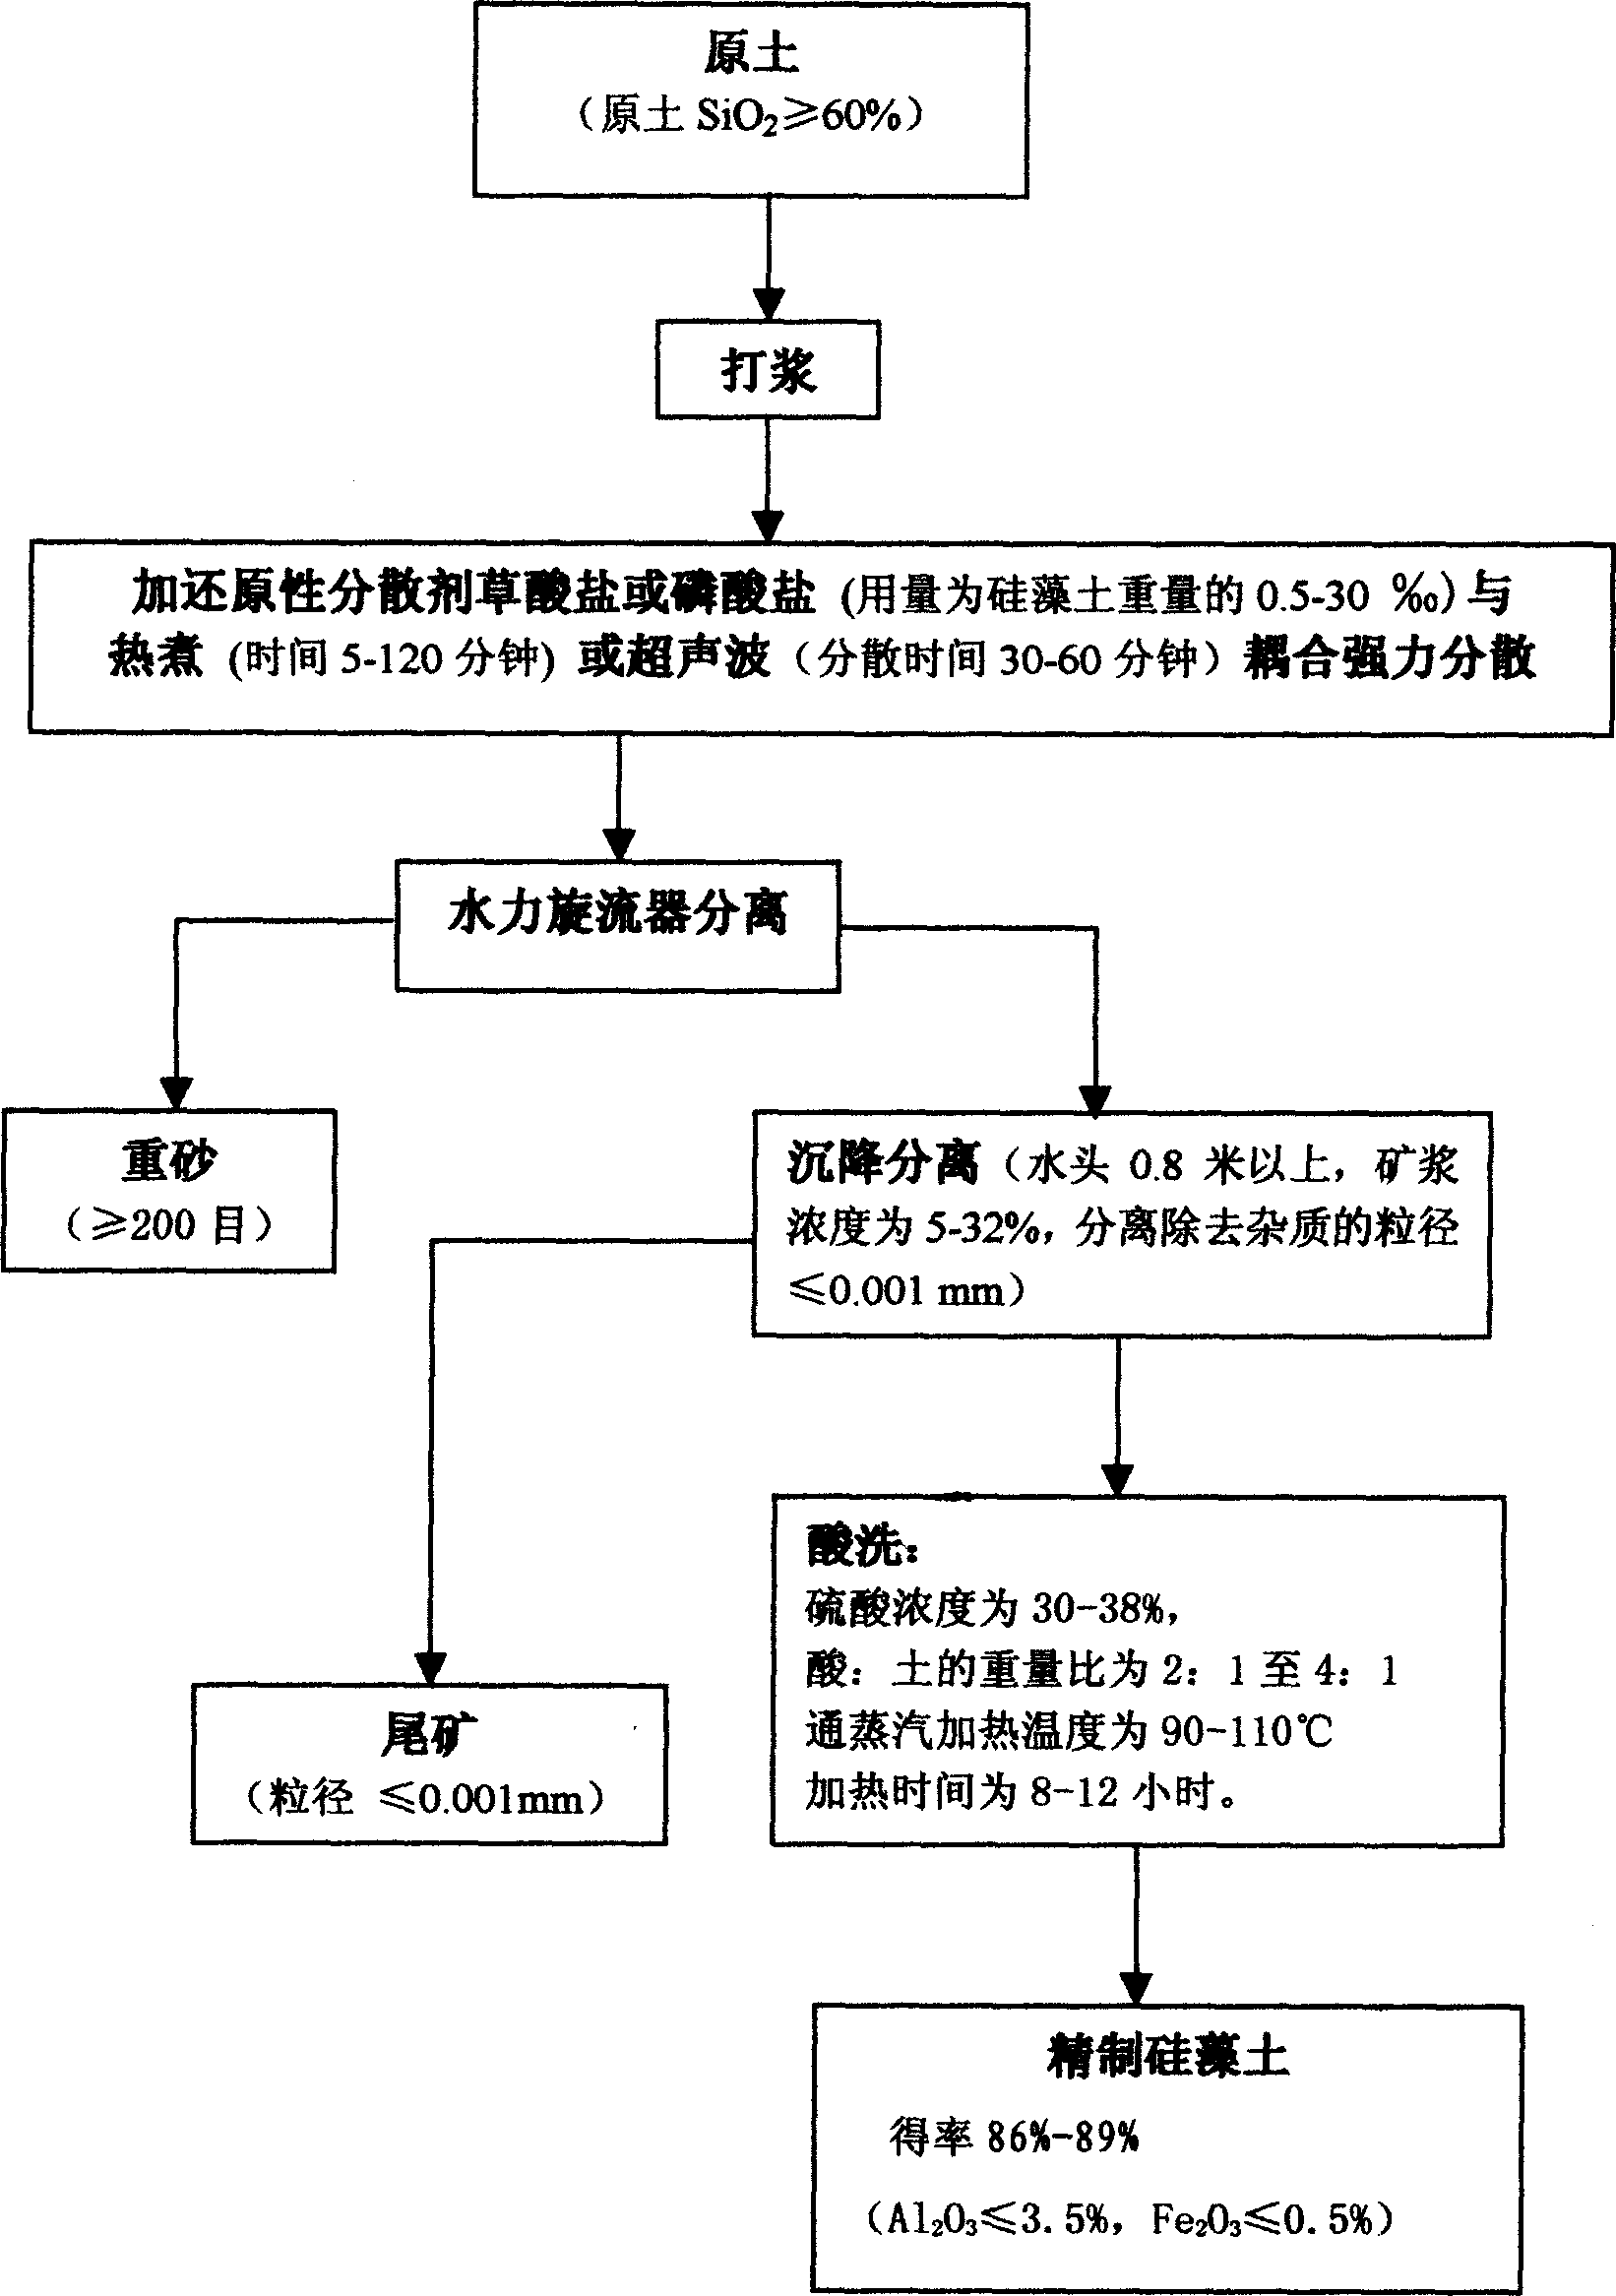 Two-stage method for separating and refining diatomaceous earth